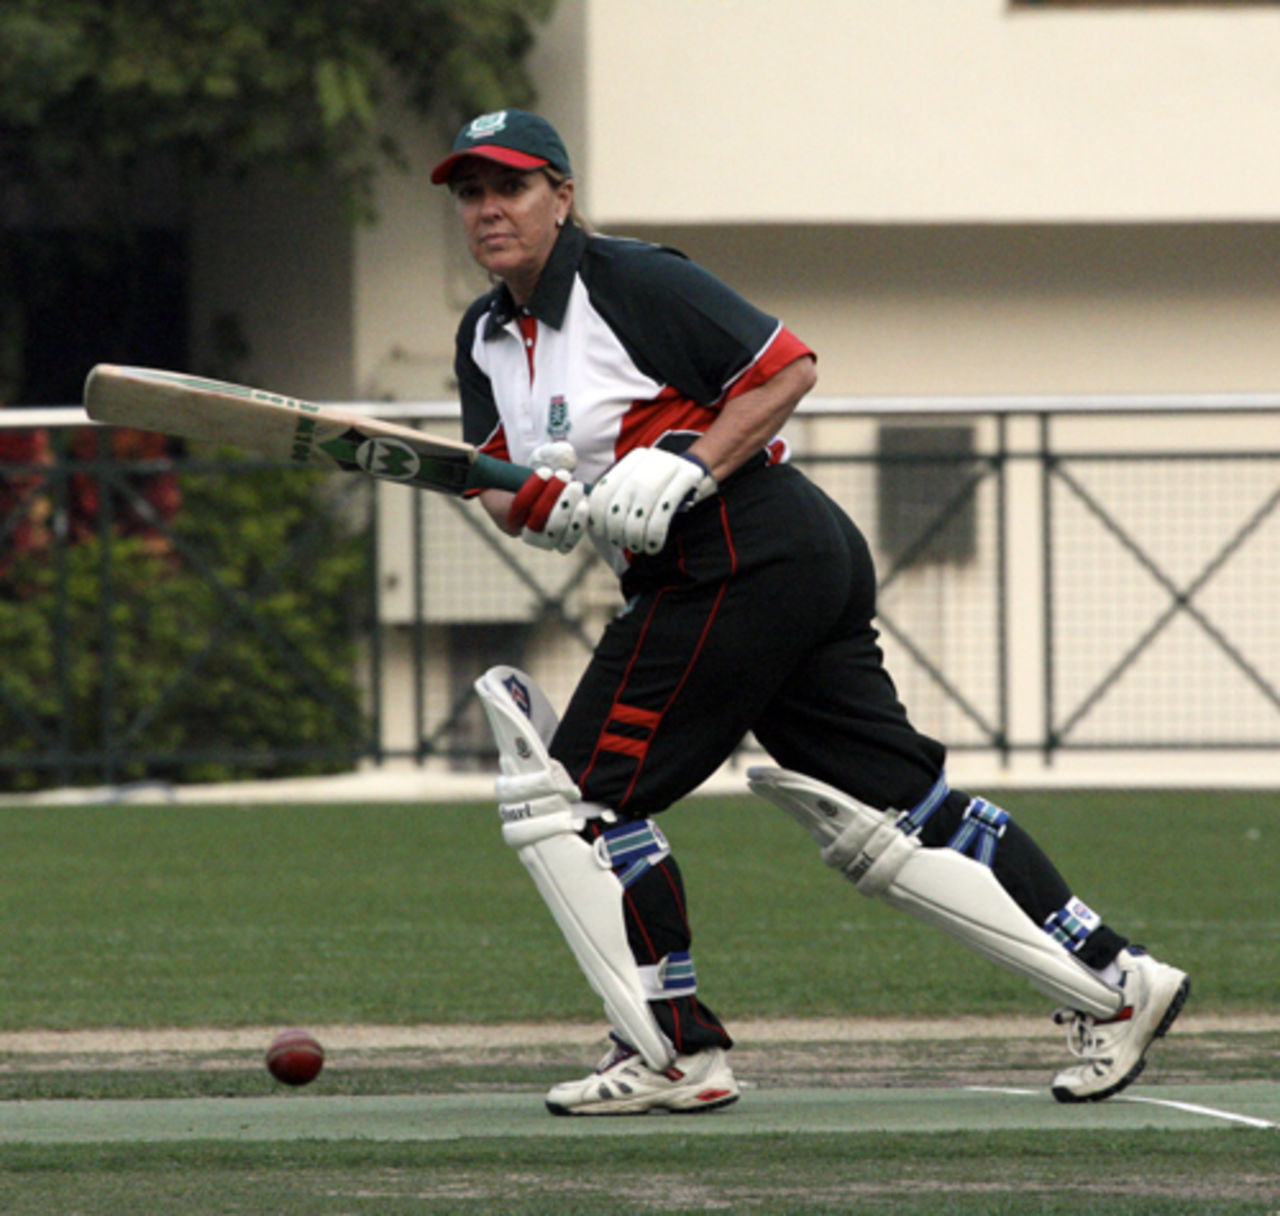 Julie Atkinson batting for KCC against Lamma during the 2007-08 HKCA Women's League Final at Kowloon Cricket Club on 08.03.2008